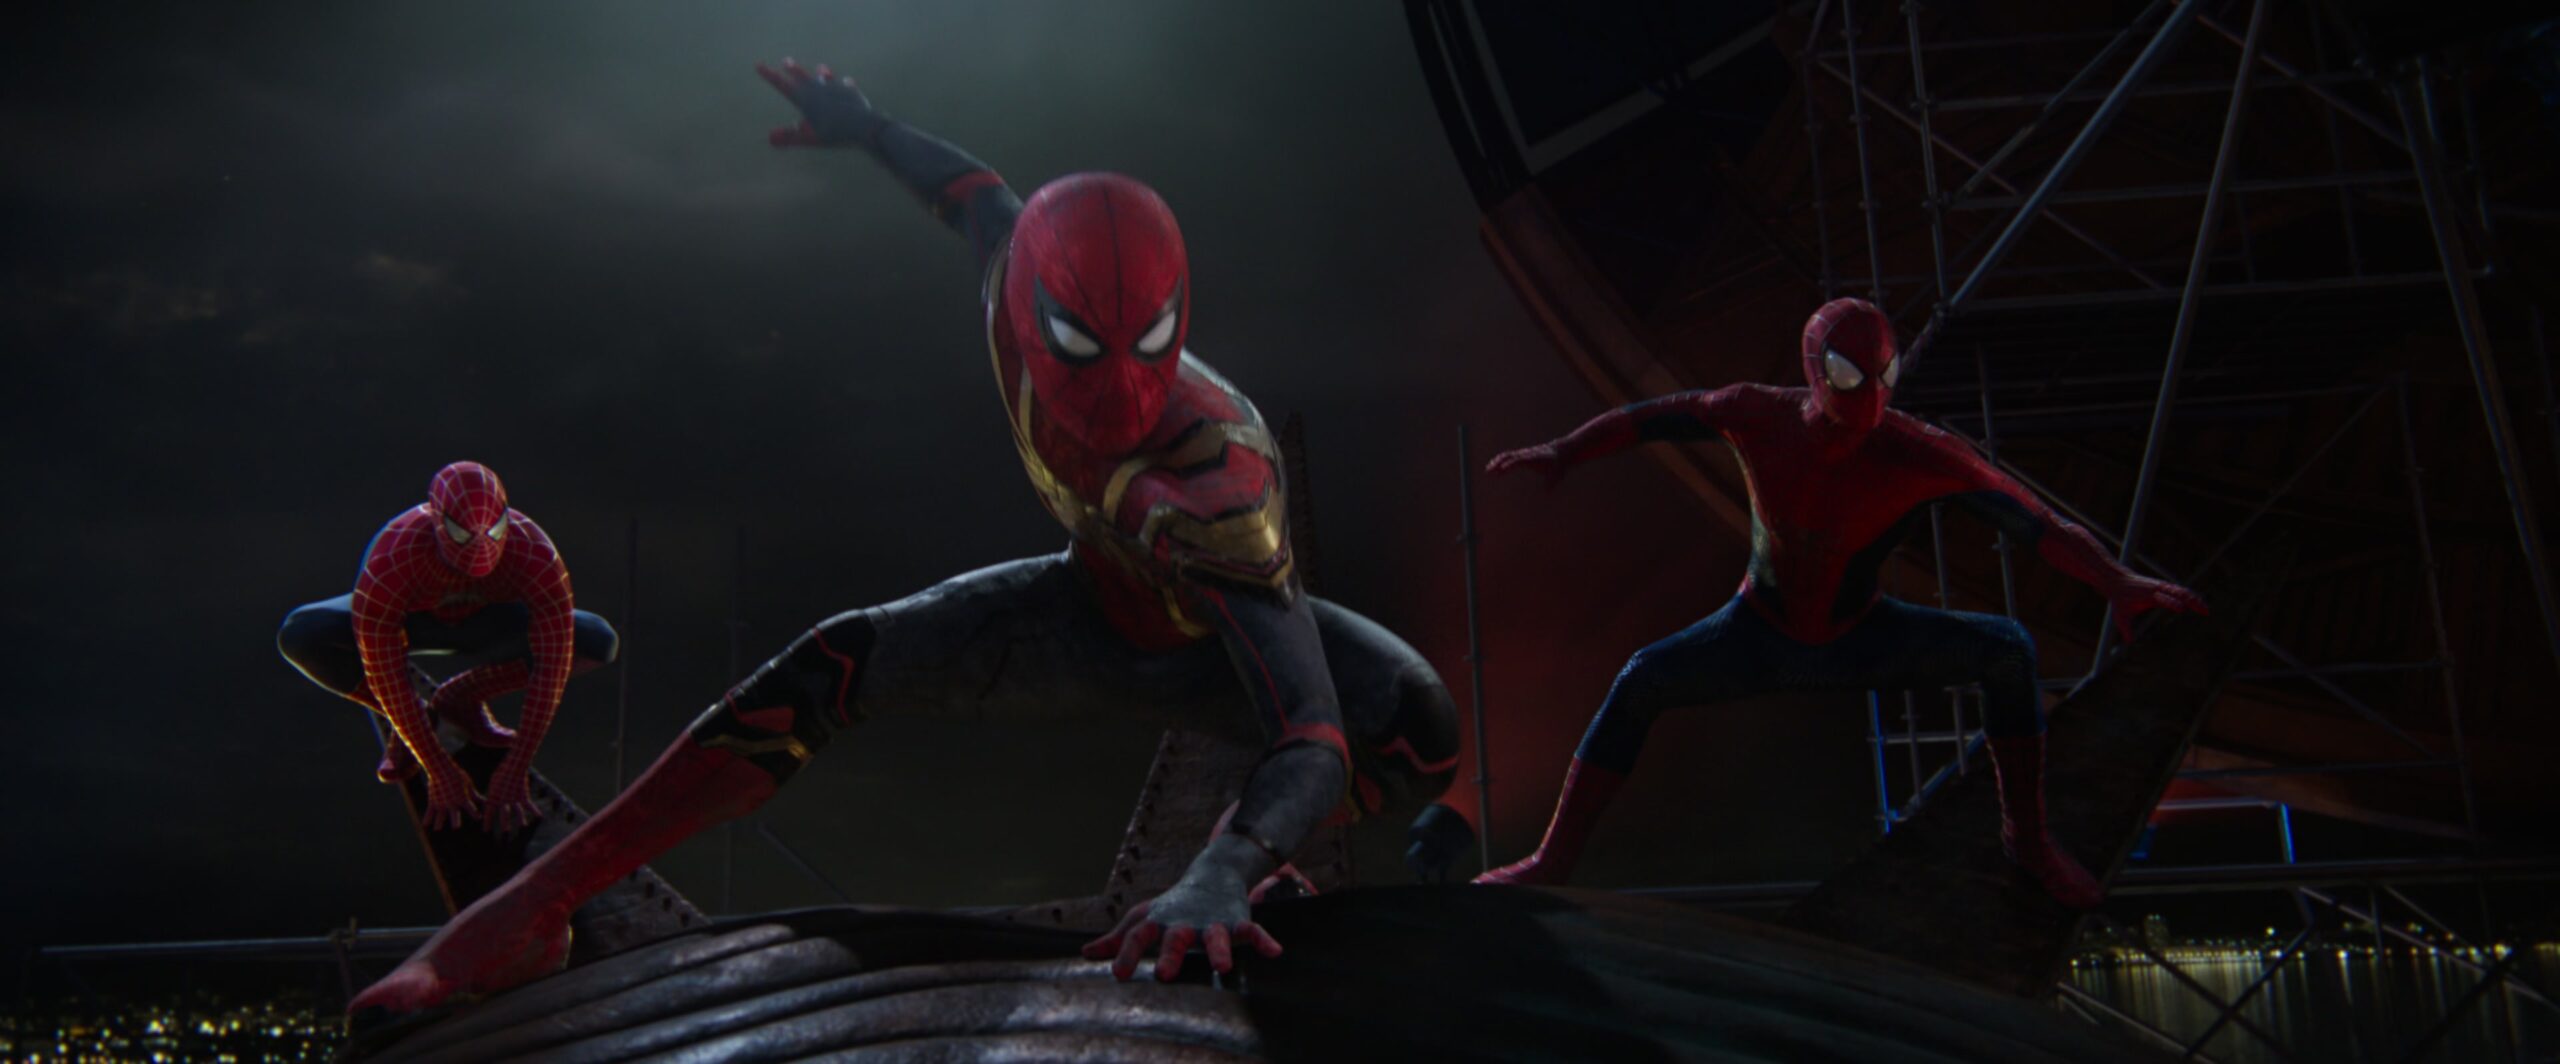 Spider-Man (Tobey Maguire), Spider-Man (Andrew Garfield), and Spider-Man (Tom Holland) prepare to save the multiverse in Spider-Man: No Way Home (2021), Marvel Entertainment via Blu-ray